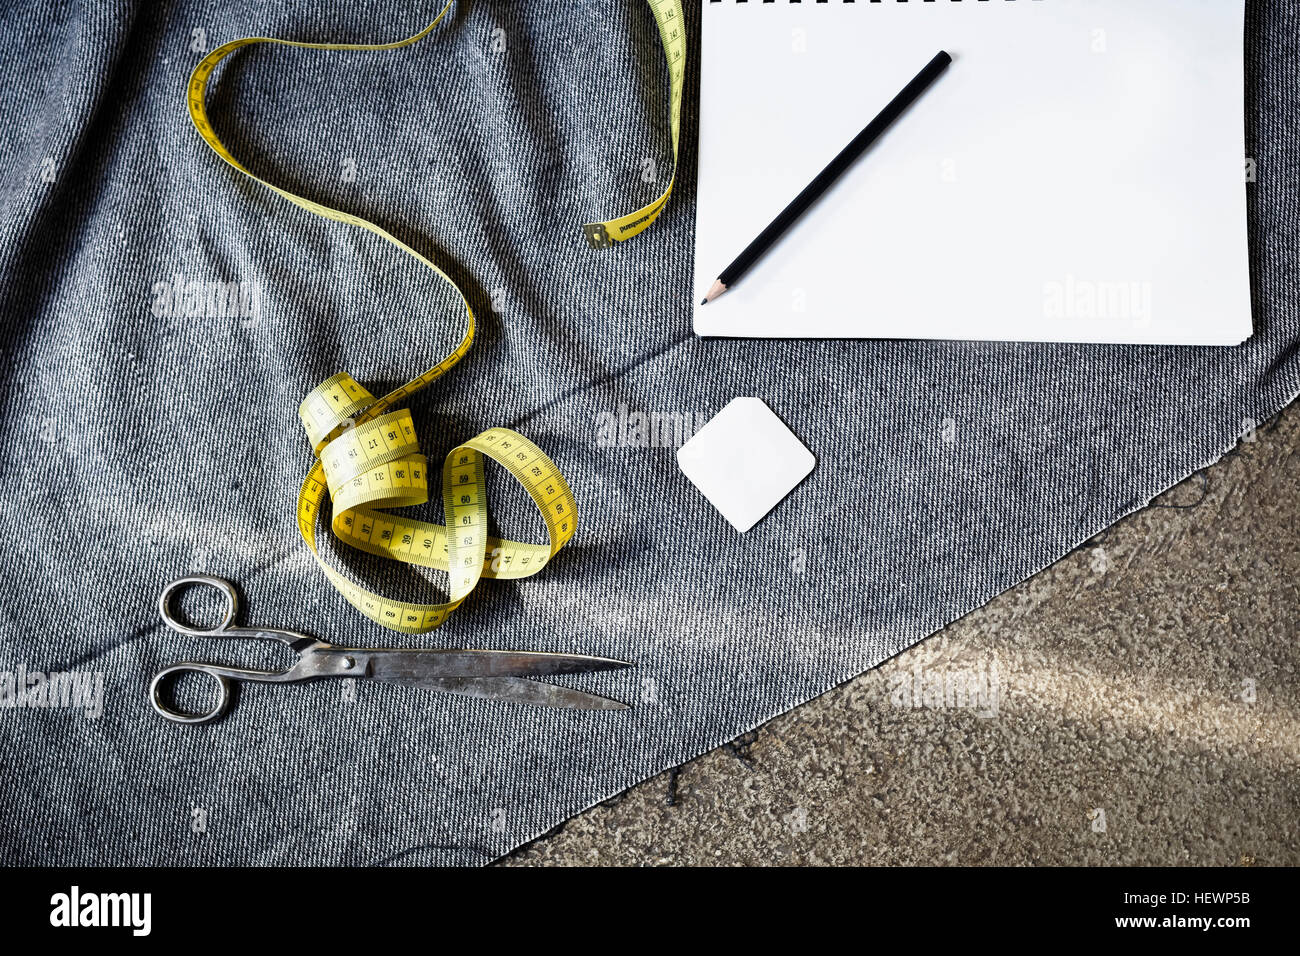 Overhead view of sewing equipment Stock Photo